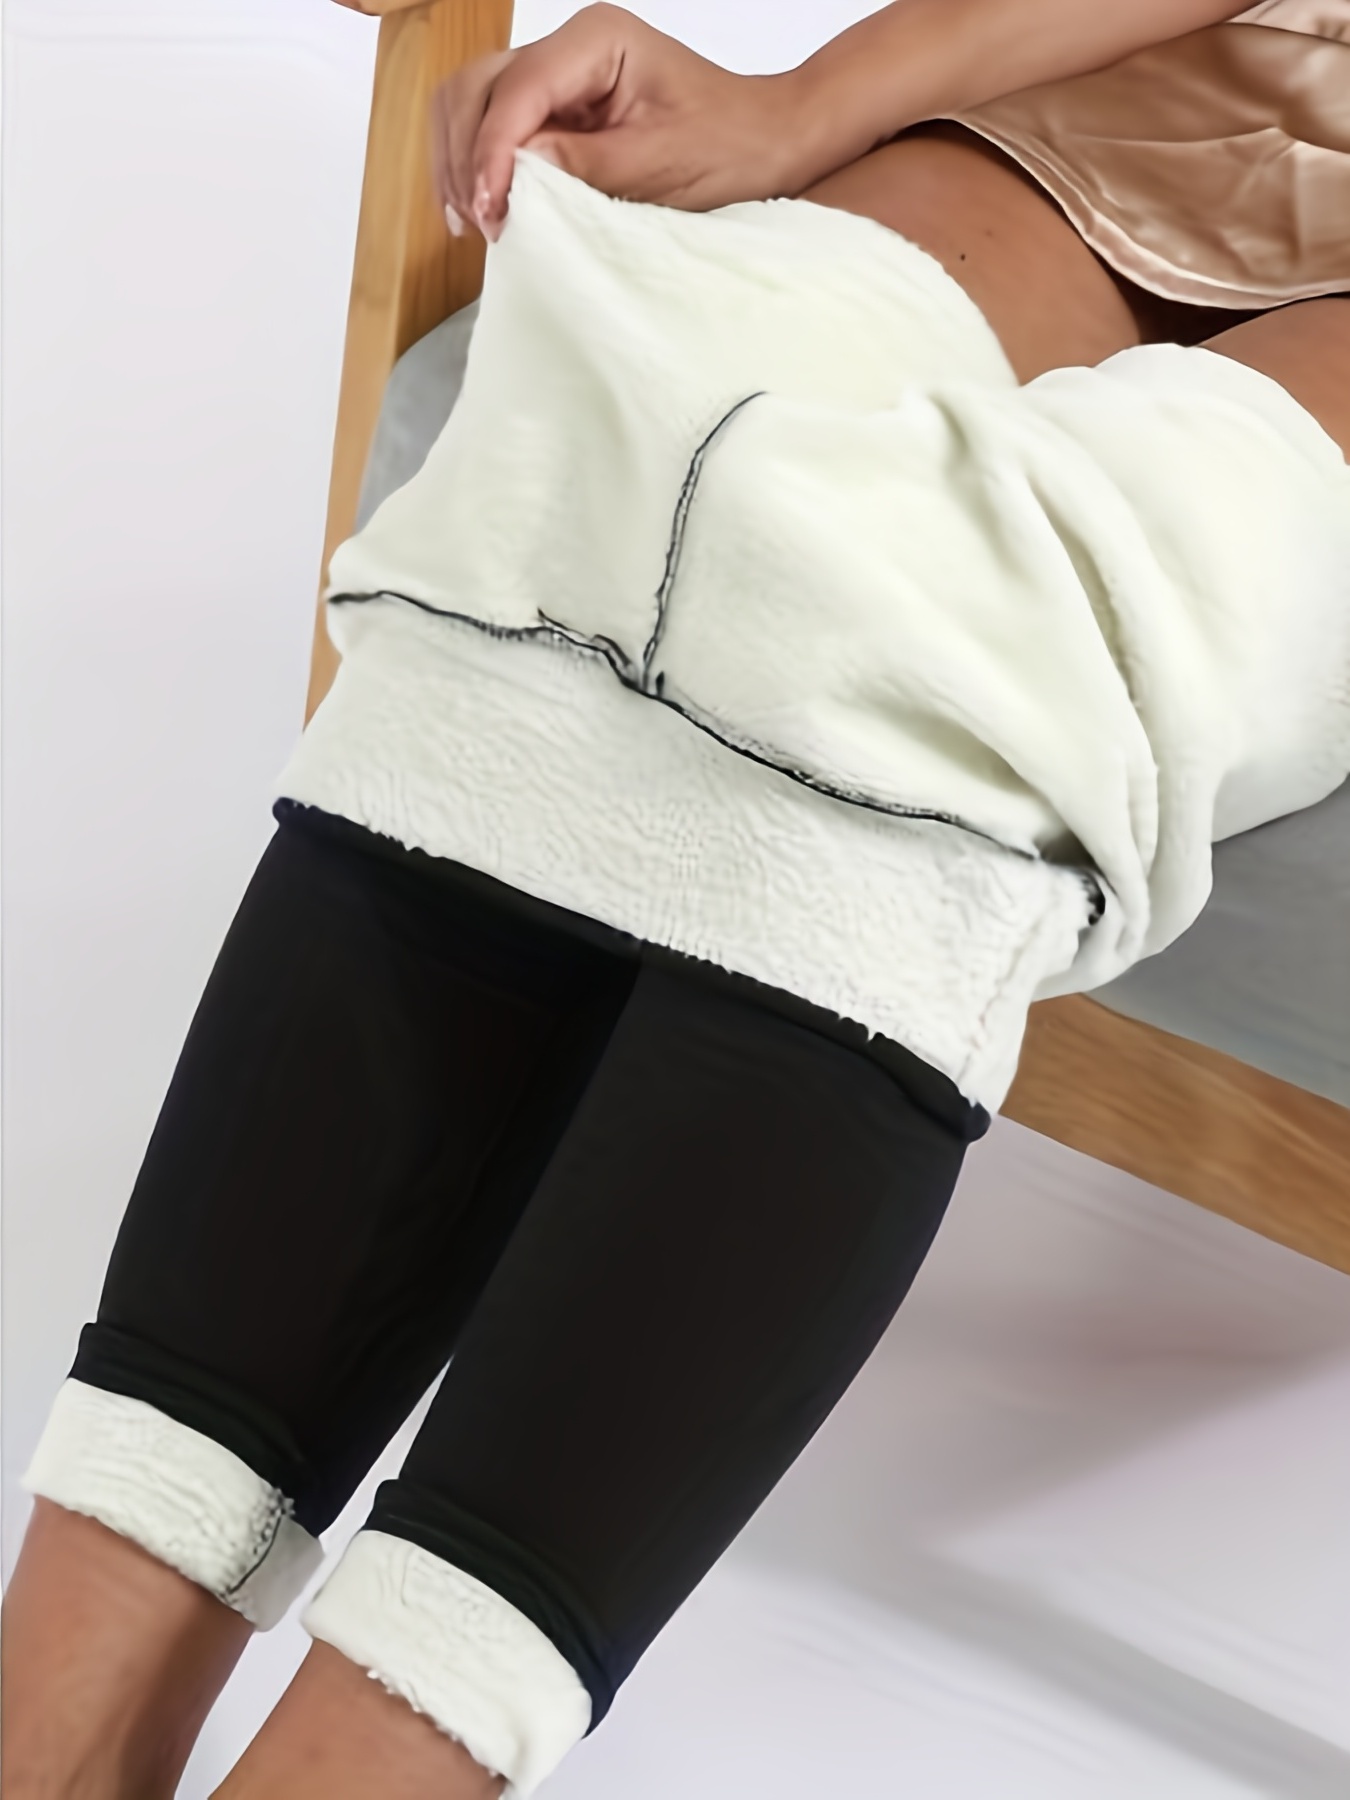 Women Winter Warm Sherpa Fleece Lined Leggings High Waist Stretchy Thick Cozy  Leggings Plush Thermal Pants Tights 